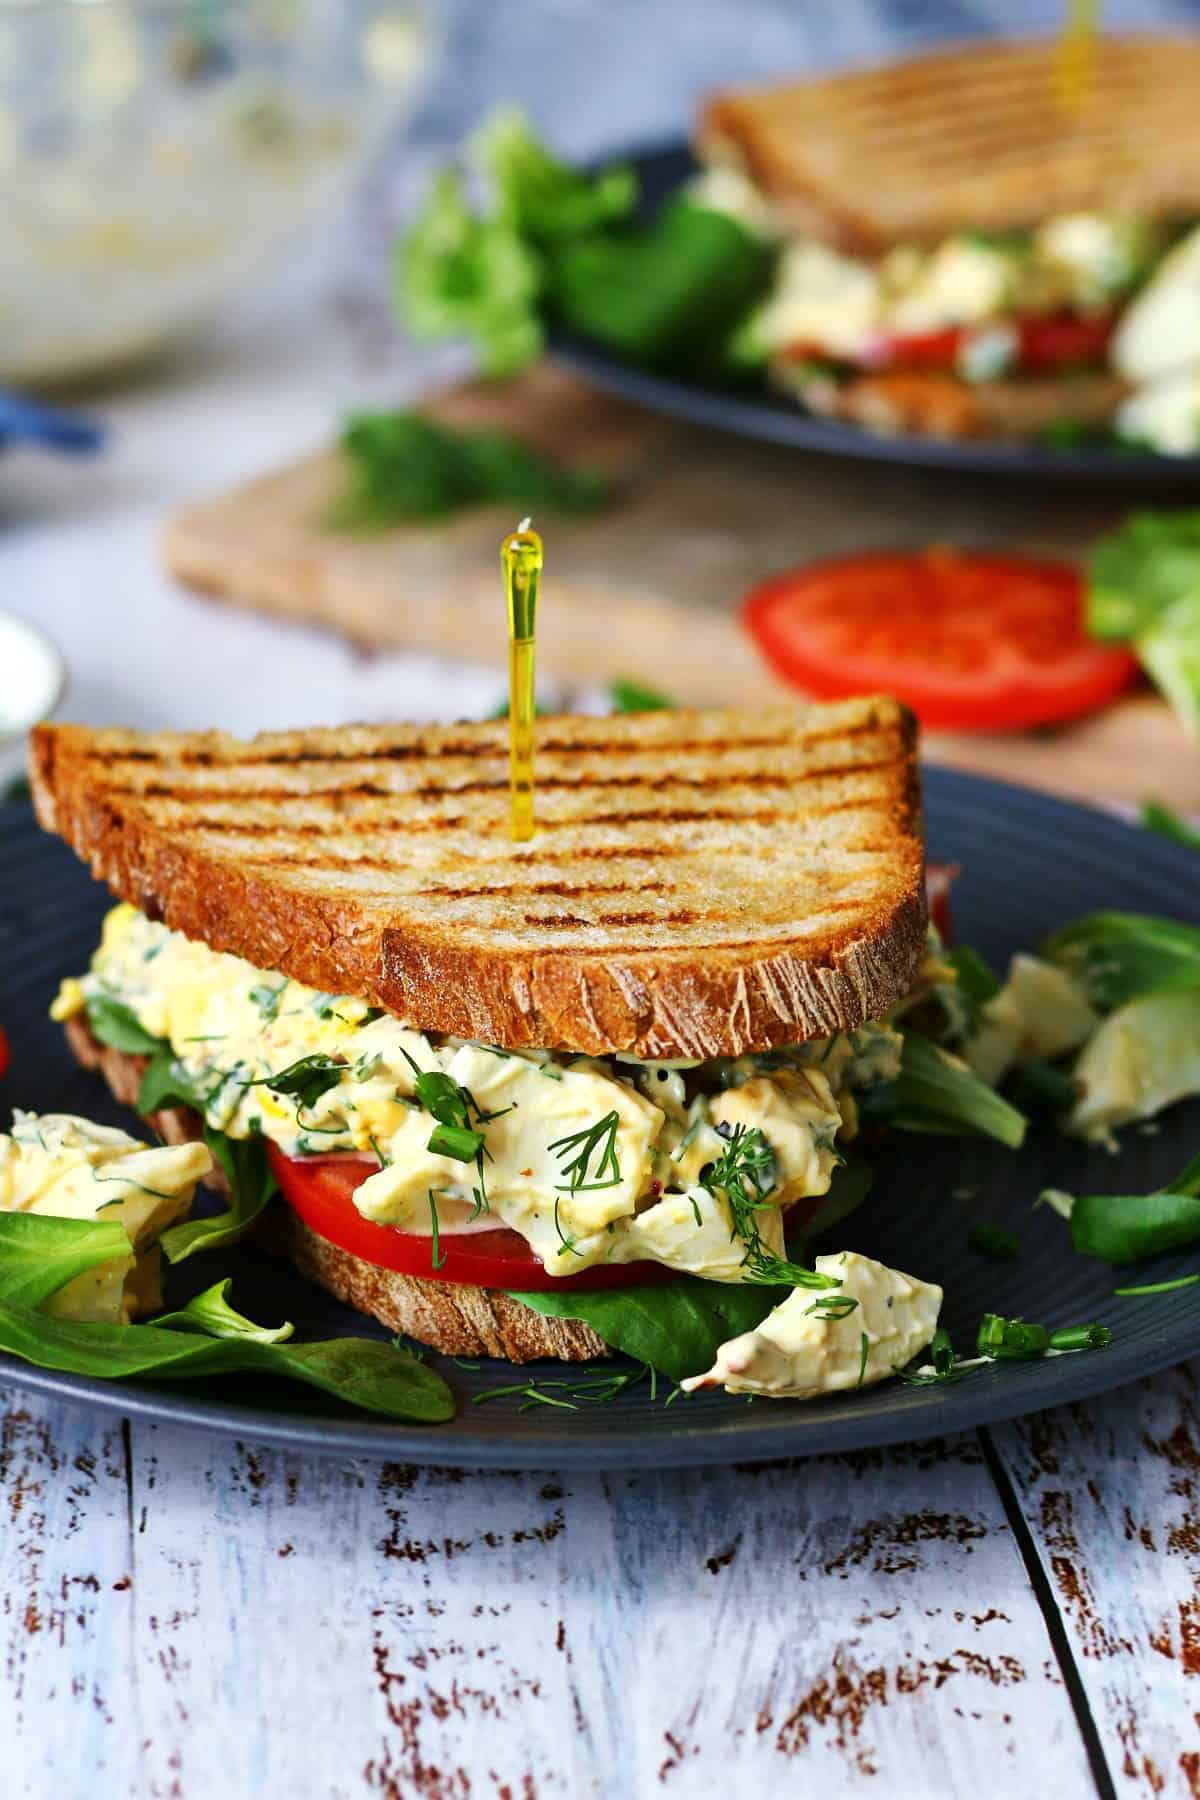 Egg salad sandwich on a black plate with lamb's lettuce for decoration and another sandwich at the back.